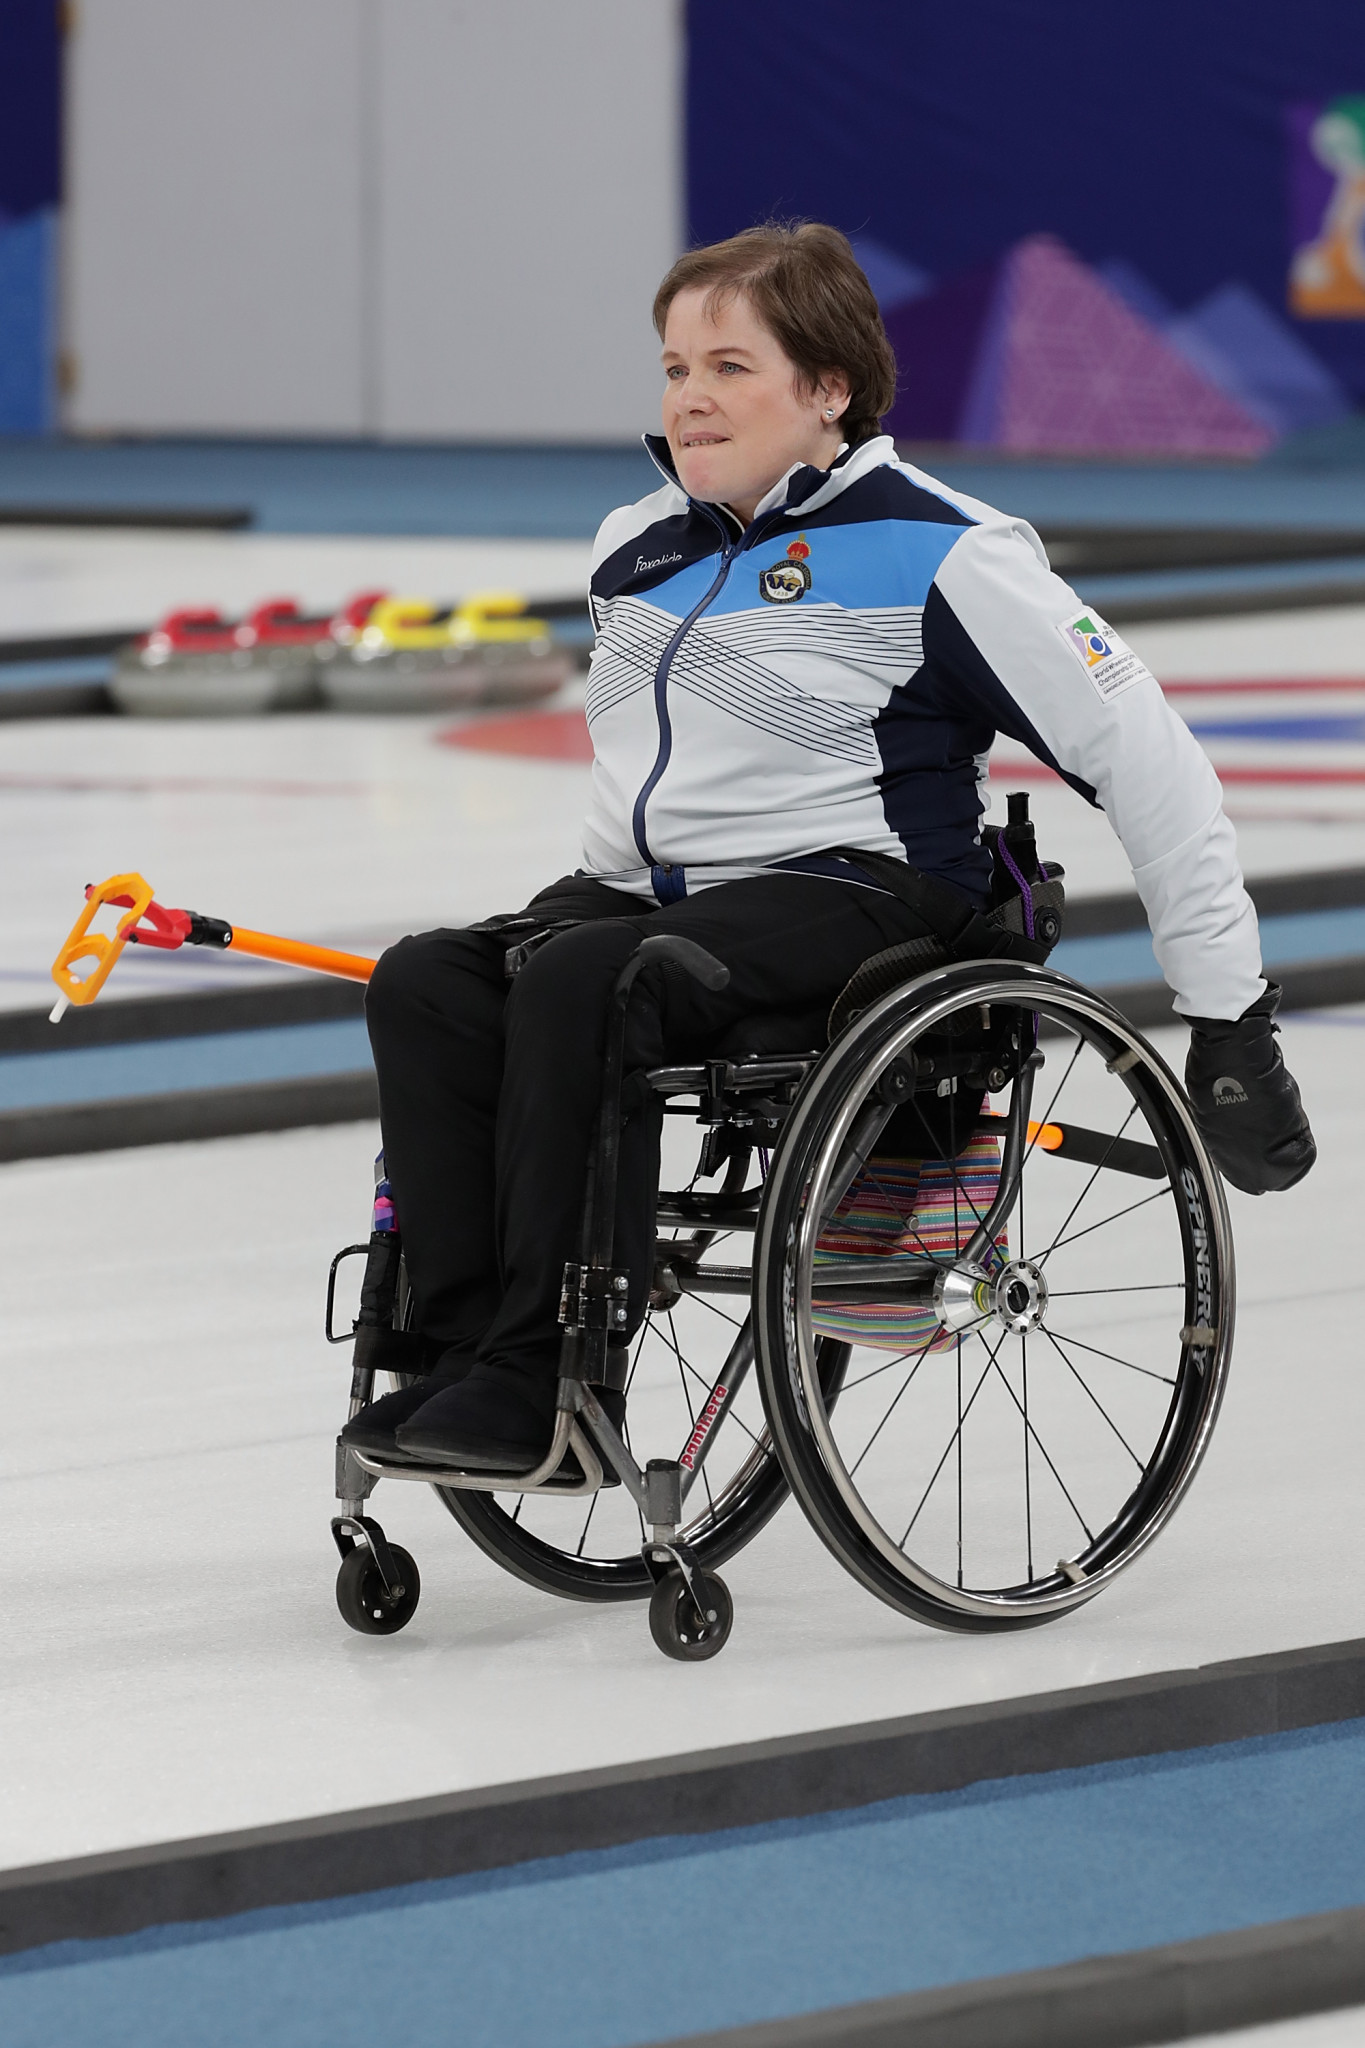 Scotland's wheelchair curling side, skipped by Aileen Neilson, was named Team of the Year in recognition of its silver medal-winning performance at the 2019 World Championship in Stirling in Scotland ©Getty Images